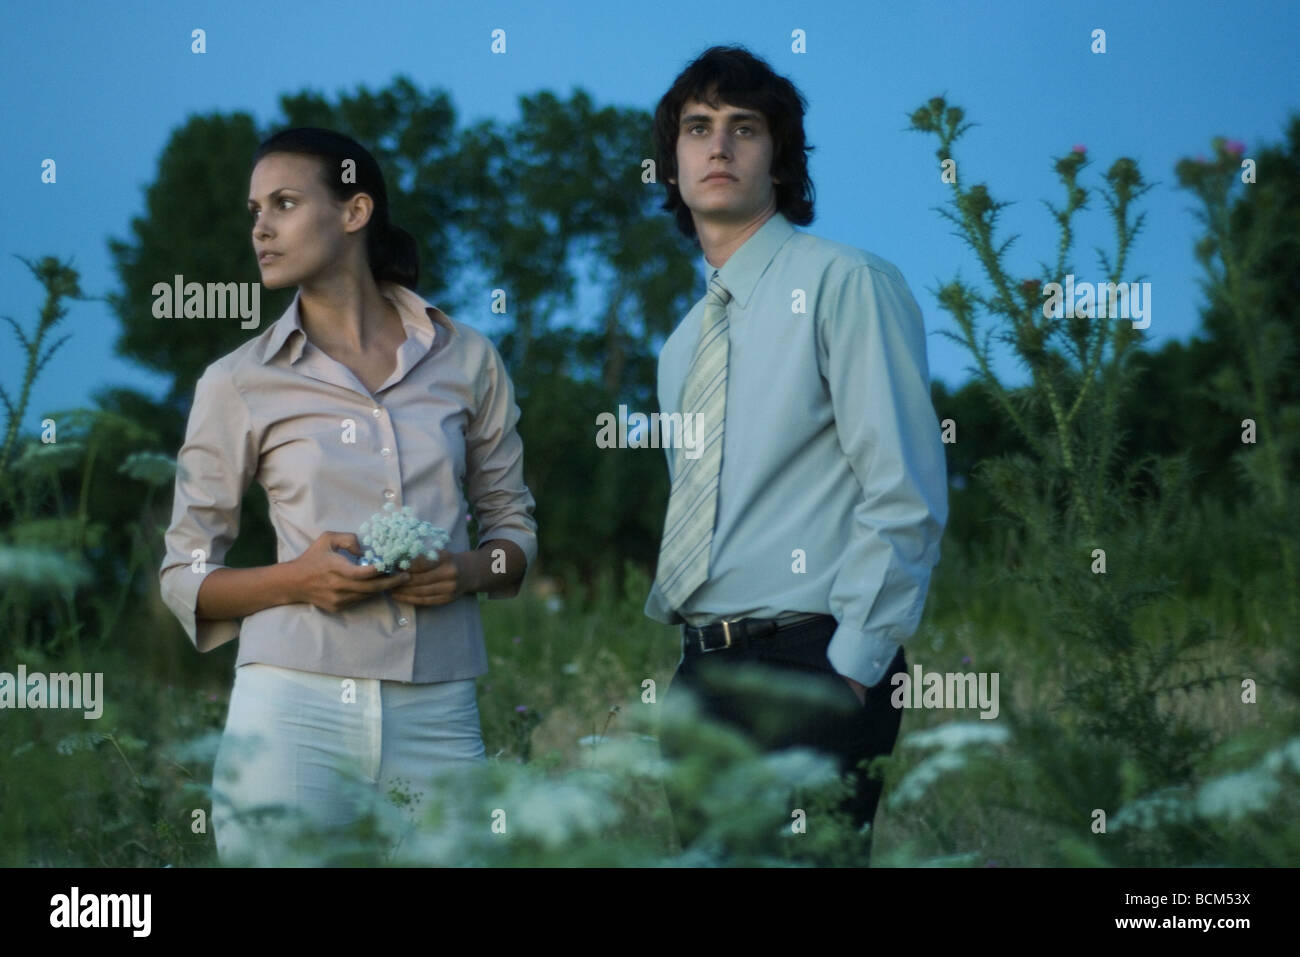 Couple standing in field, à l'écart, woman holding wildflowers Banque D'Images